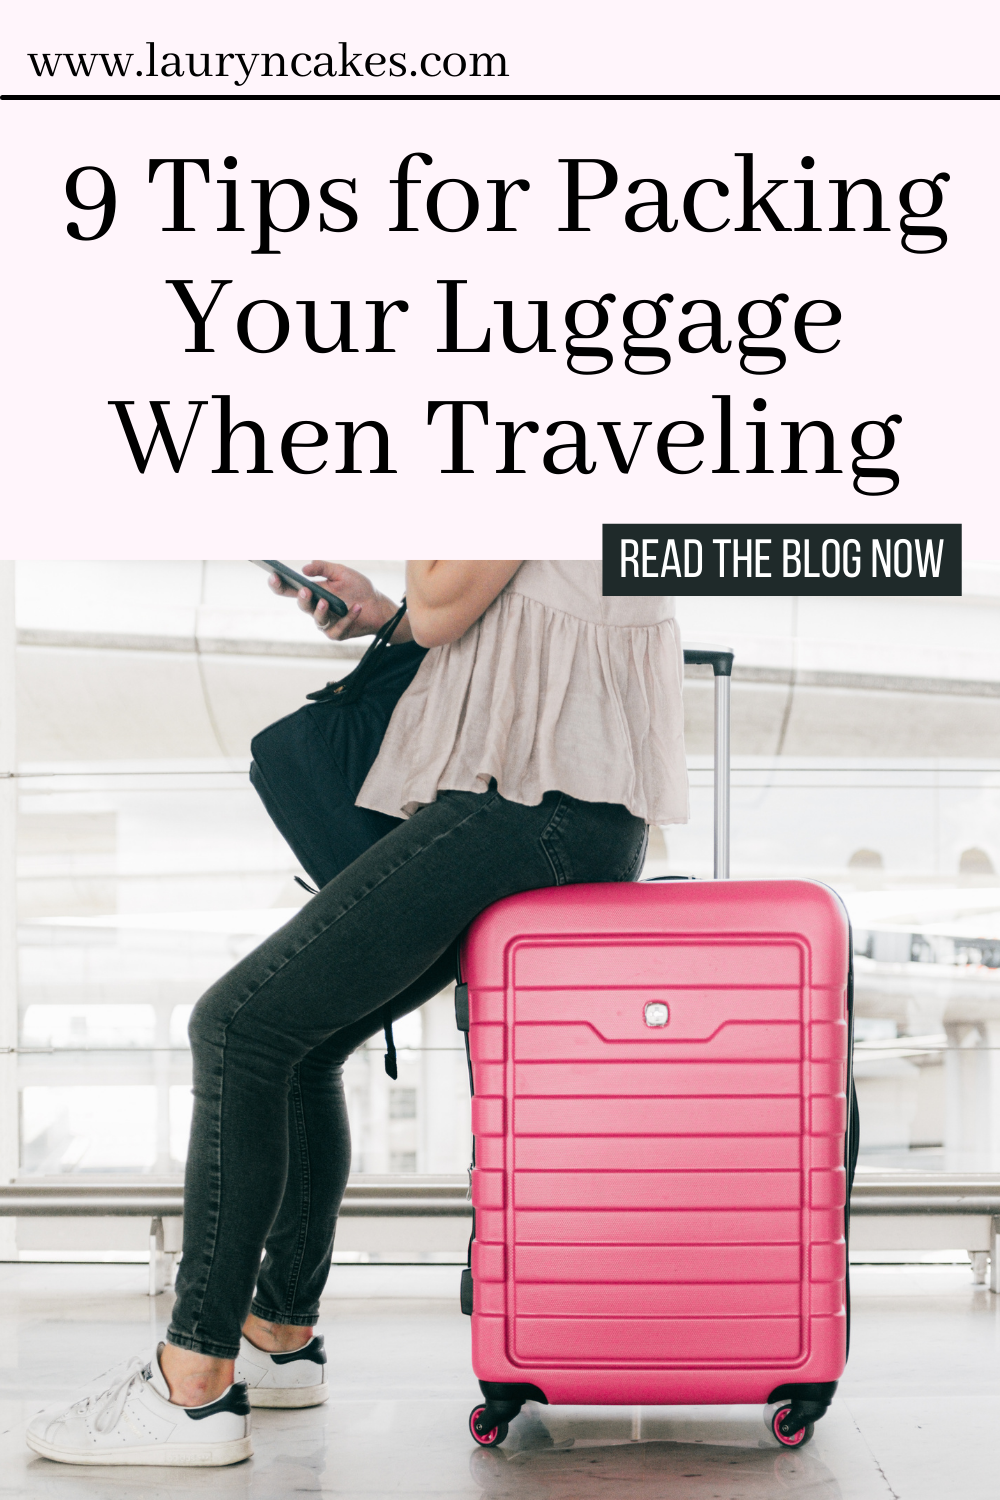 nine tips for packing your luggage when traveling | photo of a woman sitting on a pink suitcase